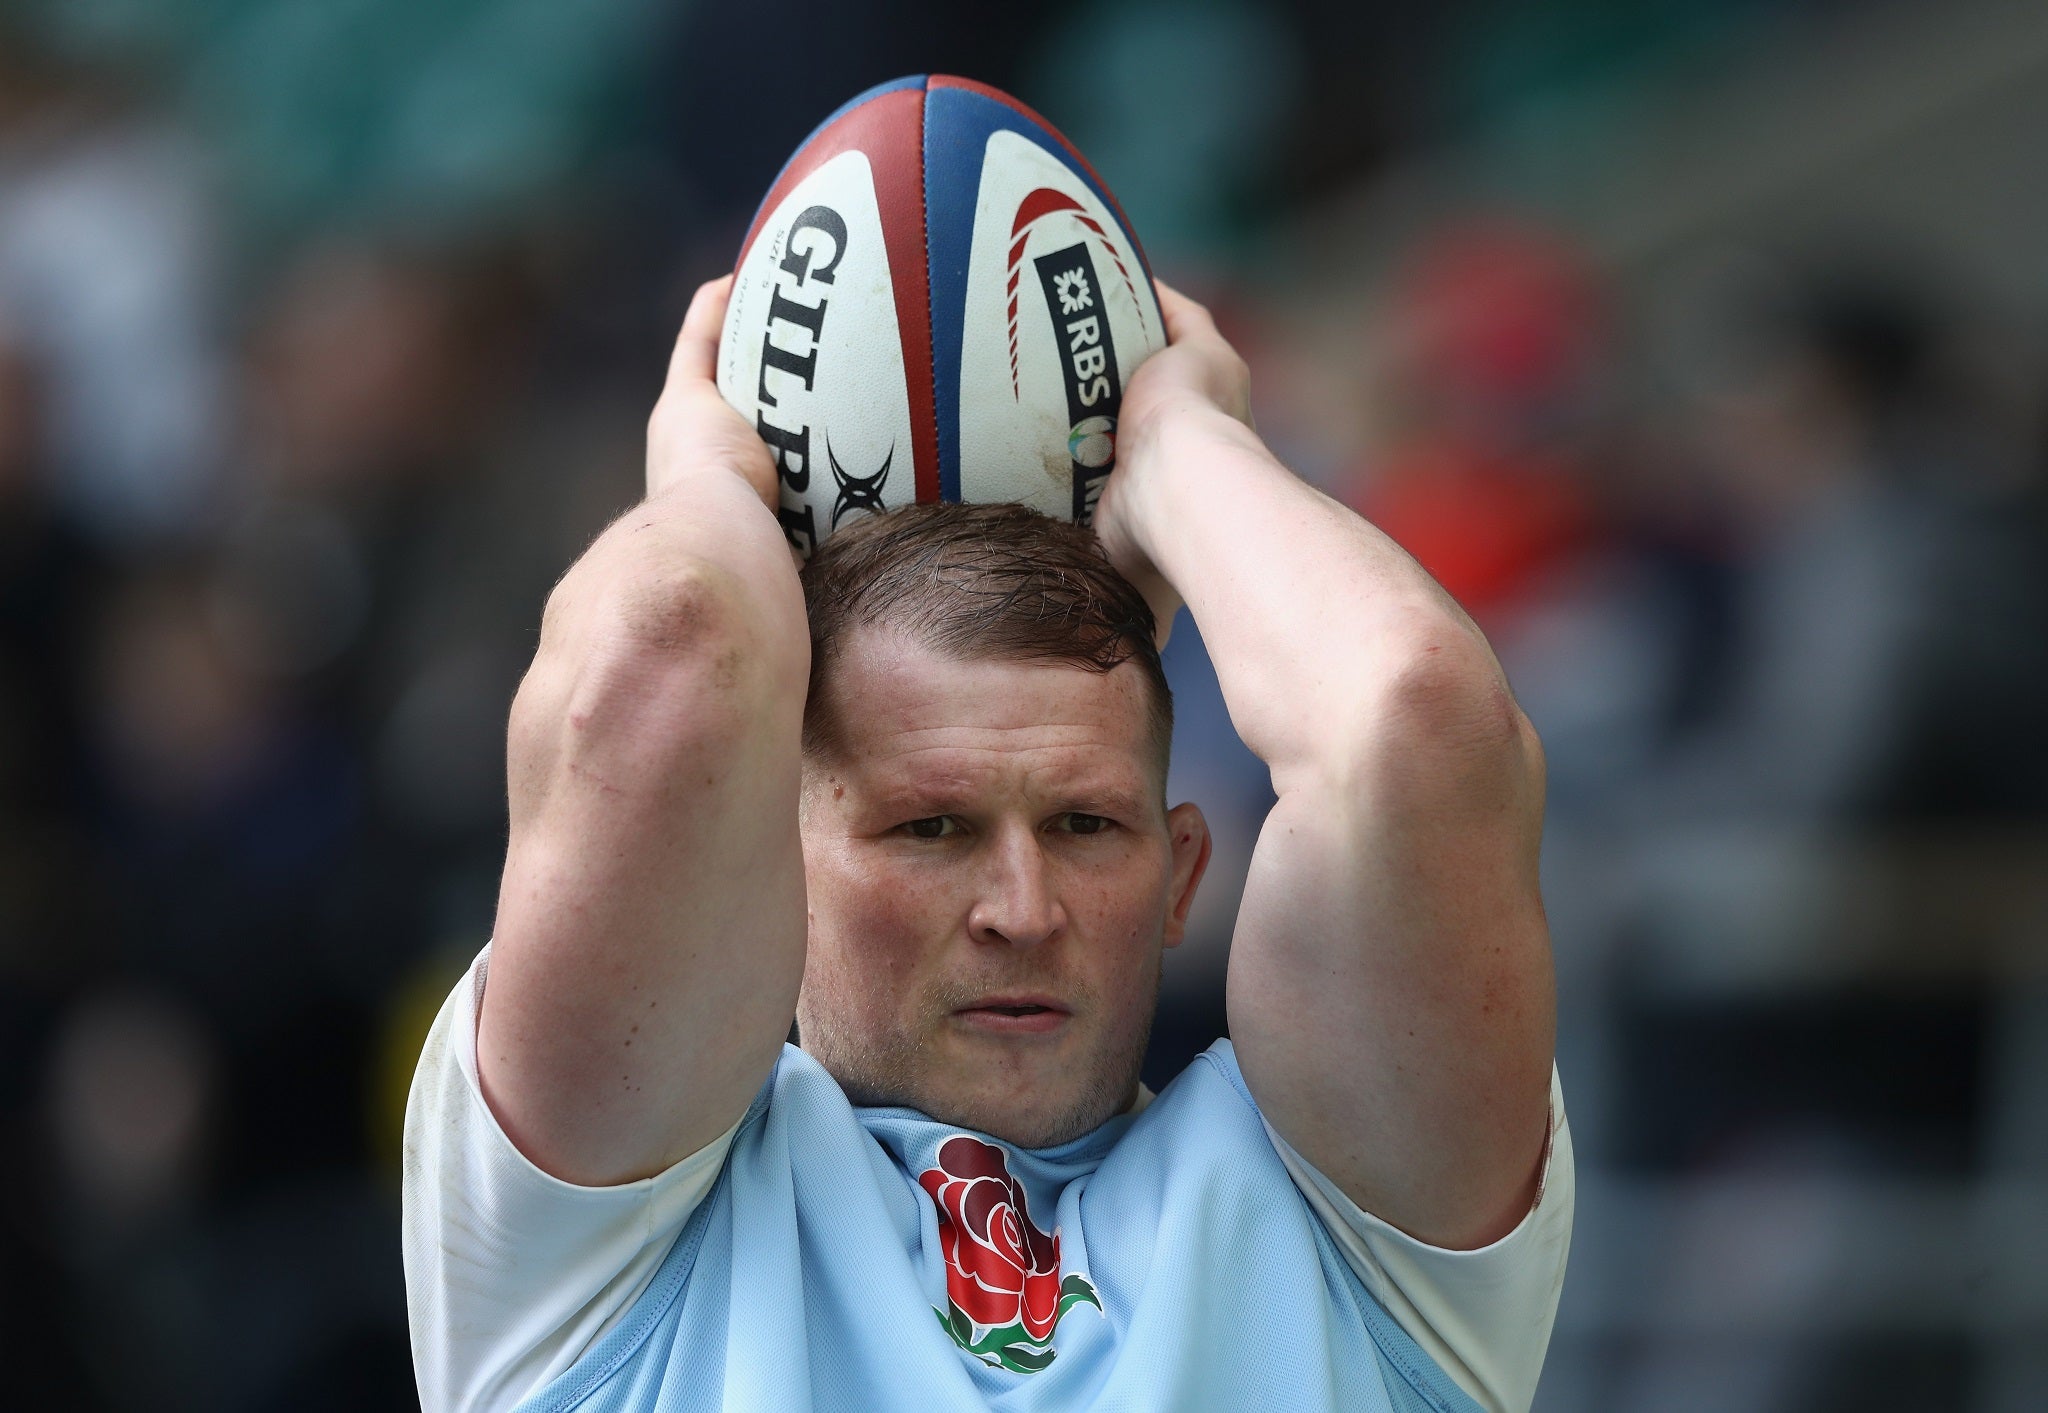 Dylan Hartley will not face any further action after his yellow card last weekend